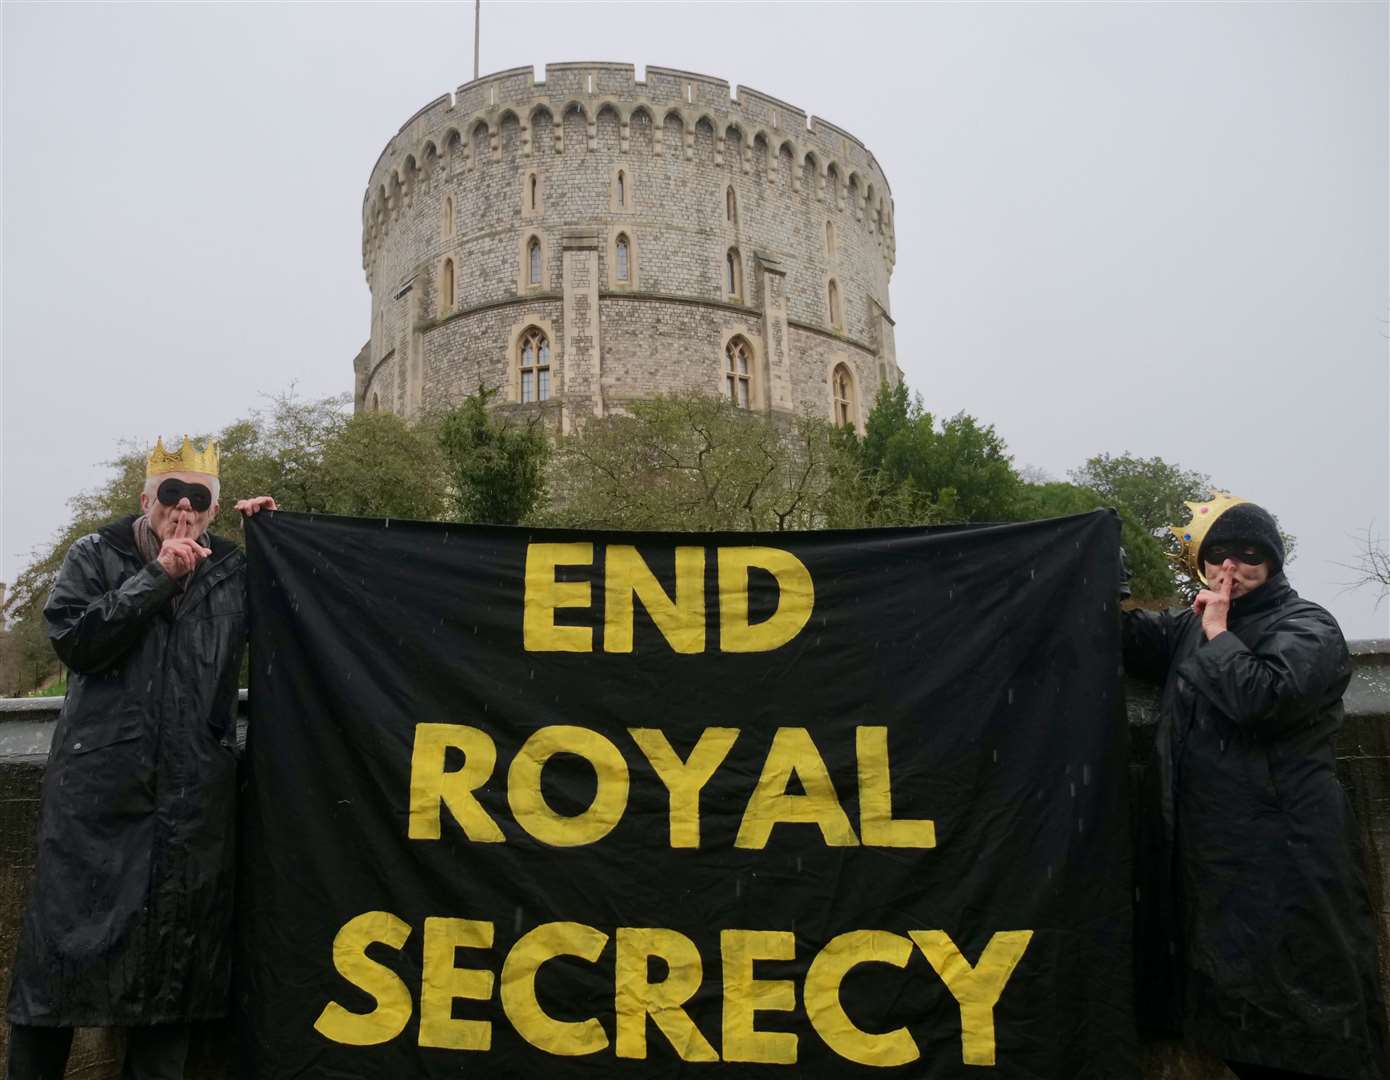 Republic’s protest over royal “secrecy” in front of the famous Round Tower (Rikki Blue/Republic/PA)